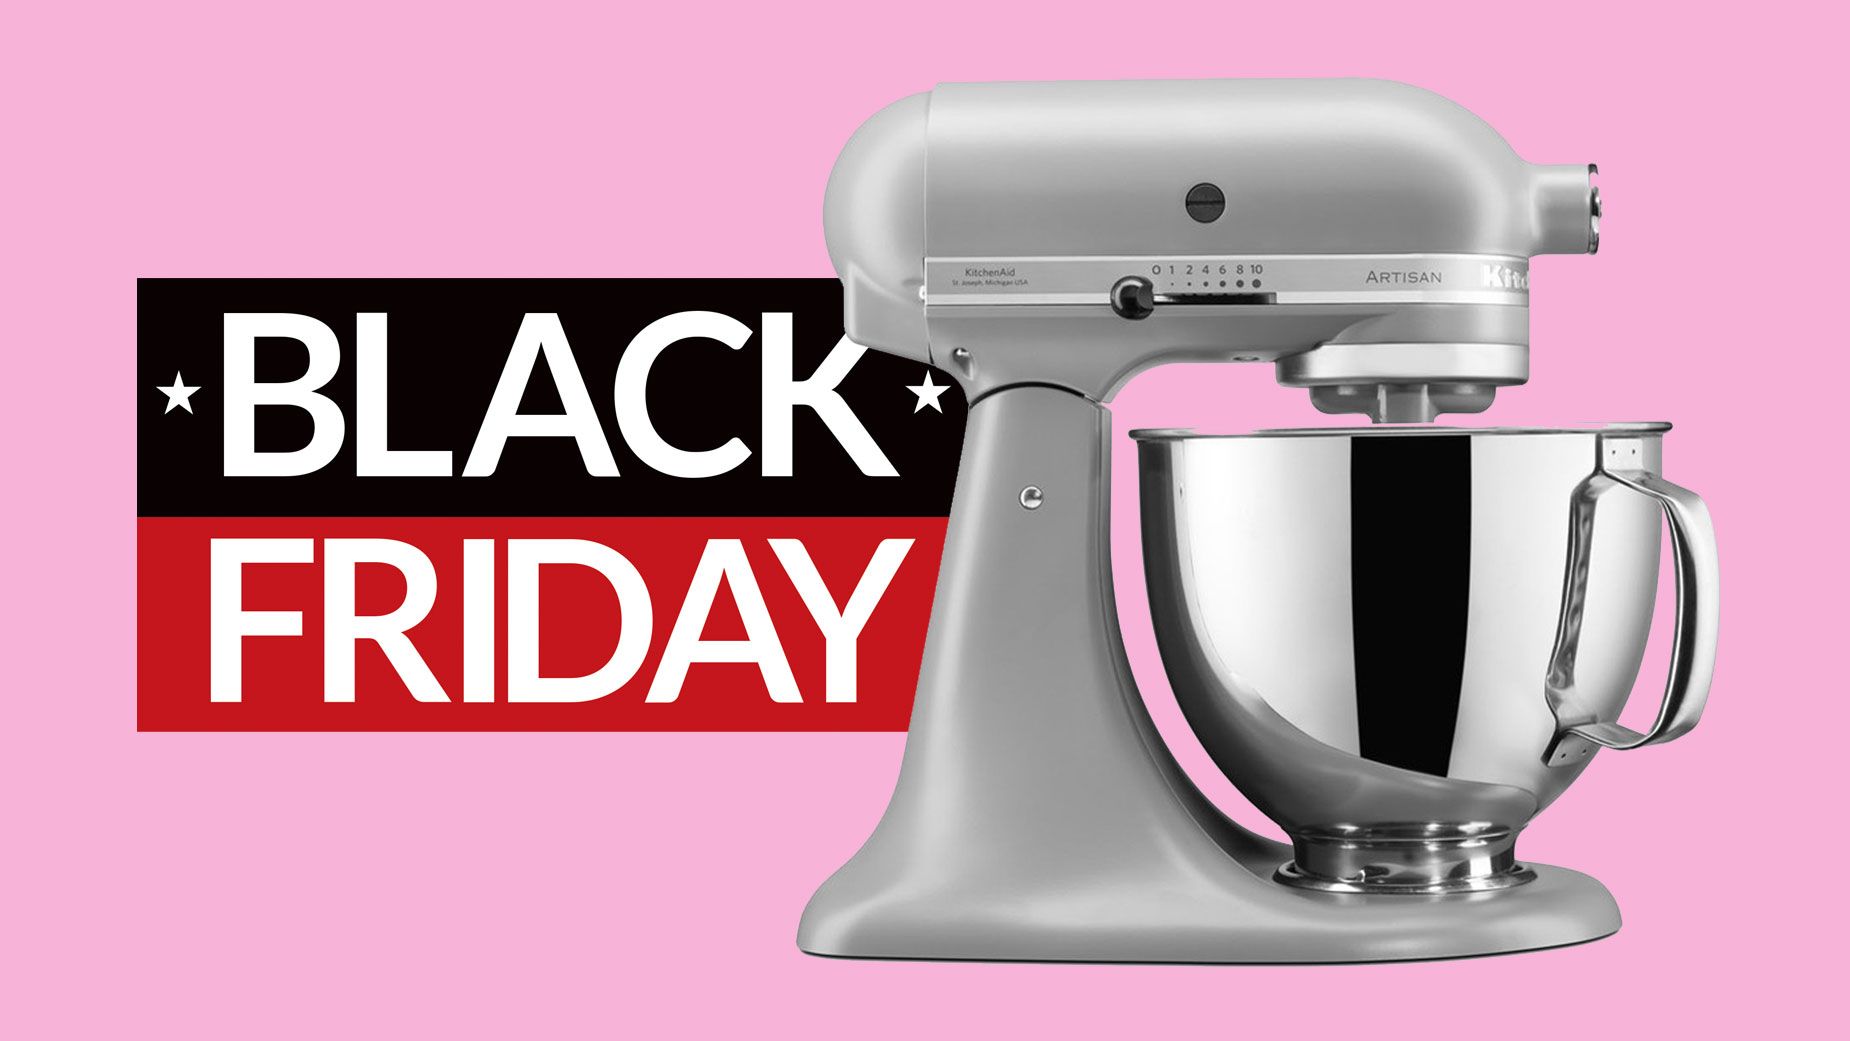 This ridiculously cheap KitchenAid Stand Mixer is the Black Friday deal